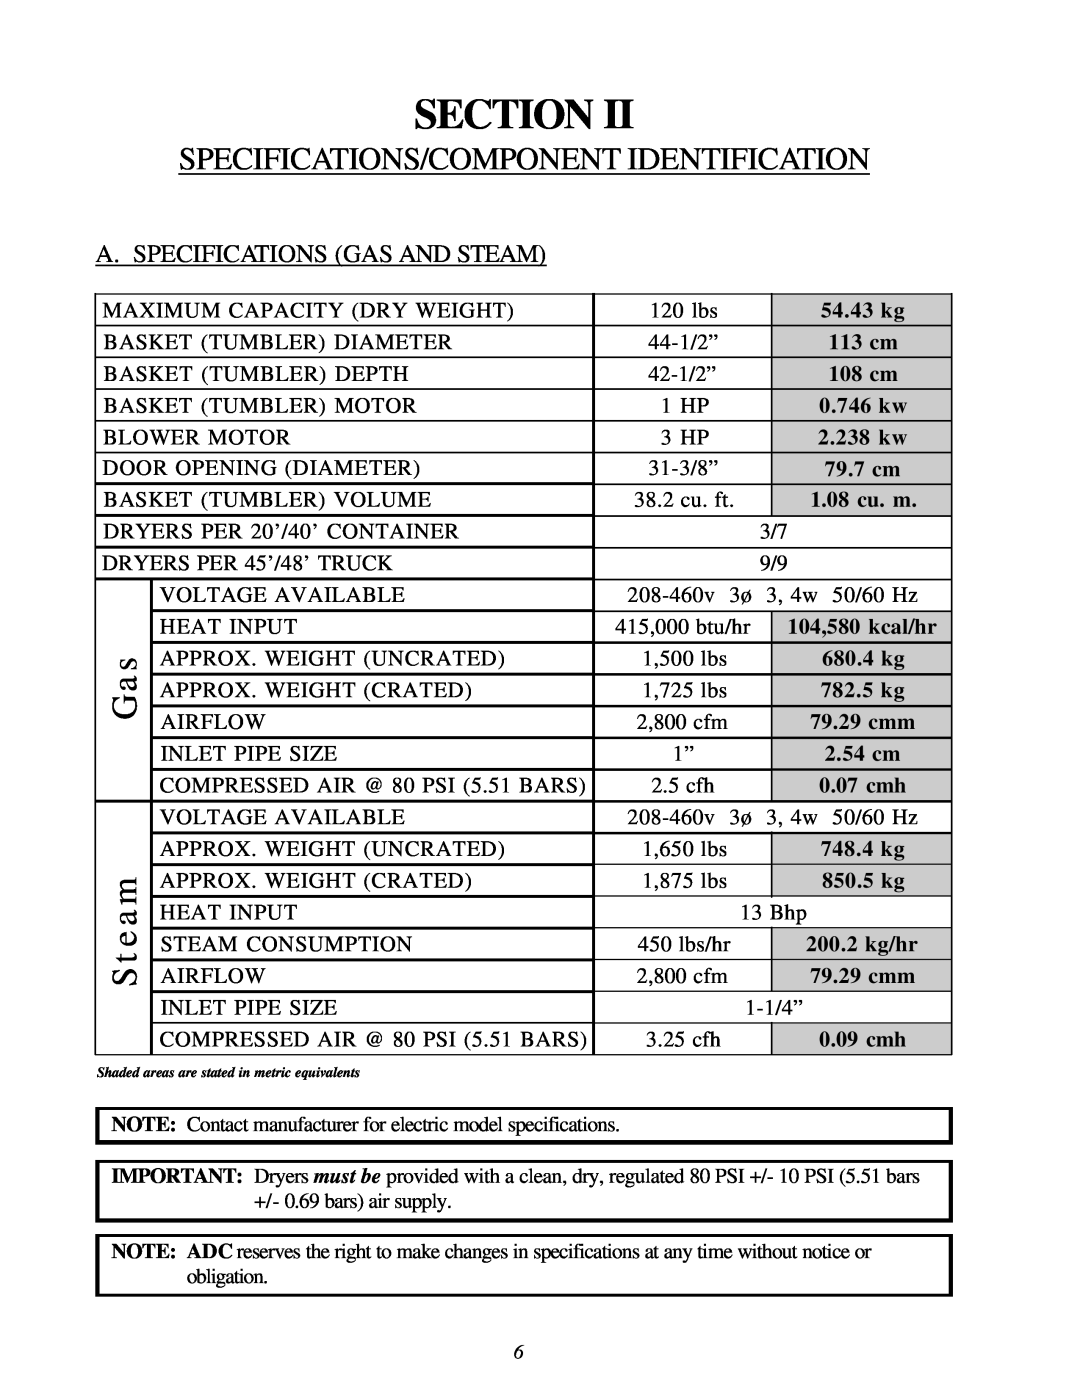 American Dryer Corp ML-122D installation manual Specifications/Component Identification, Section, Steam 